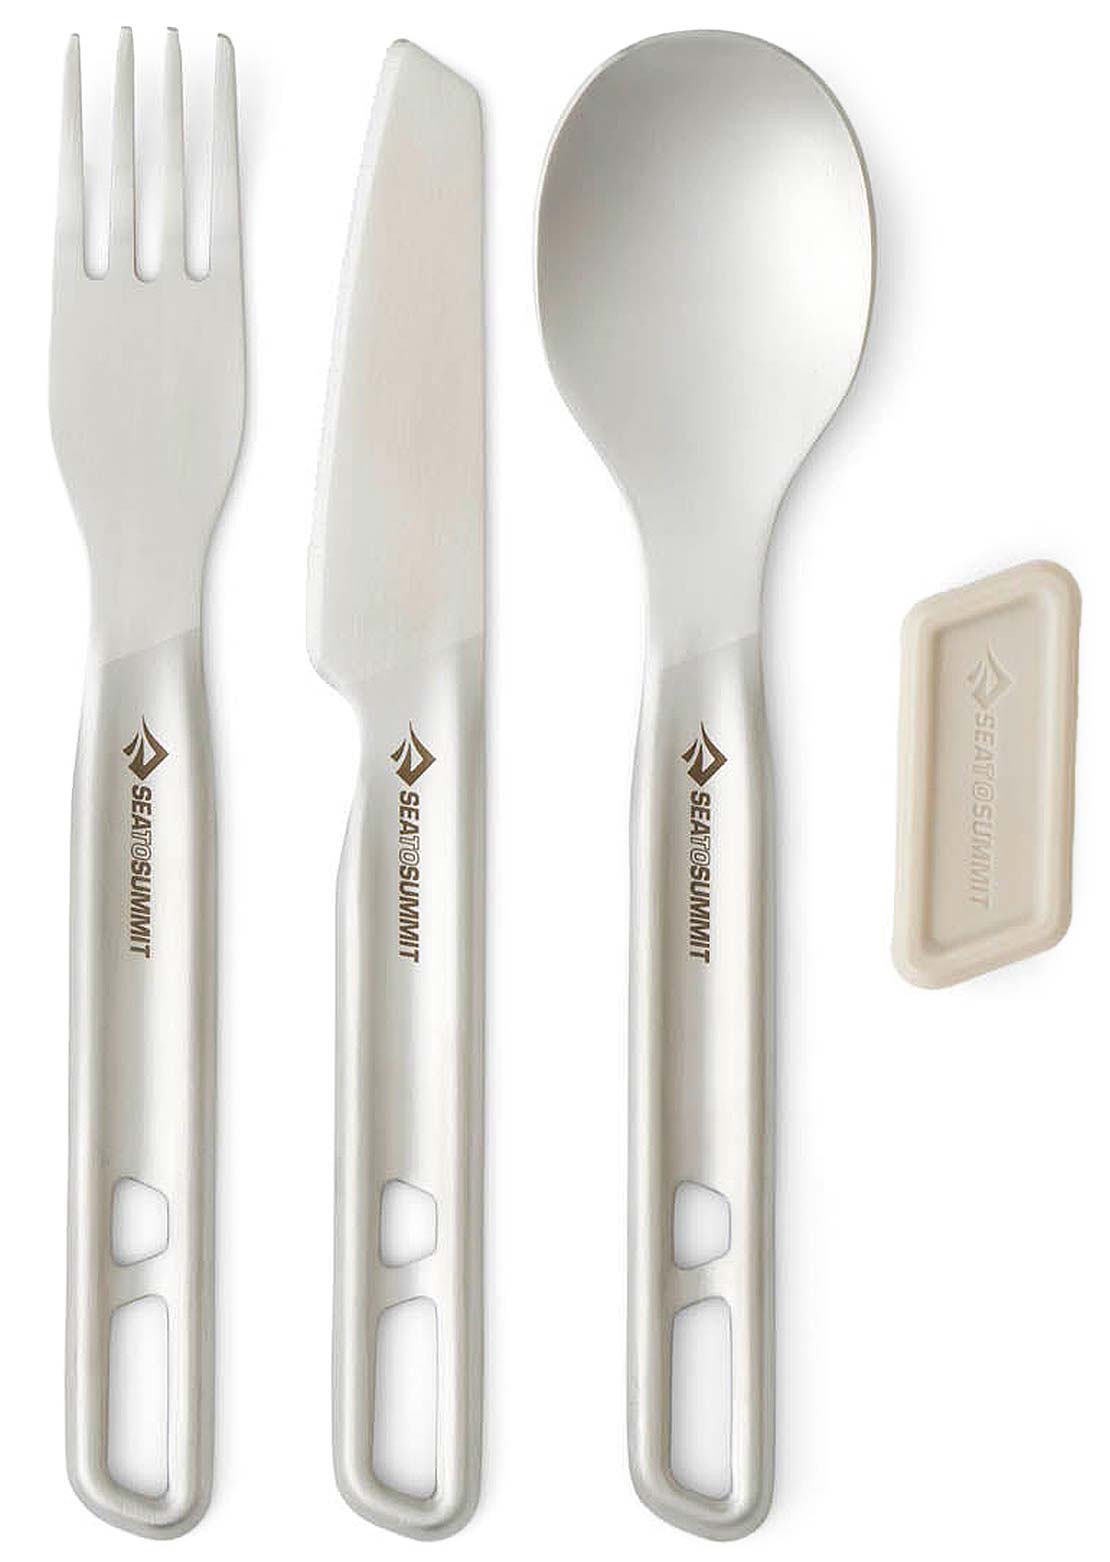 Sea To Summit Detour Stainless Steel Cutlery Set - 1 Person